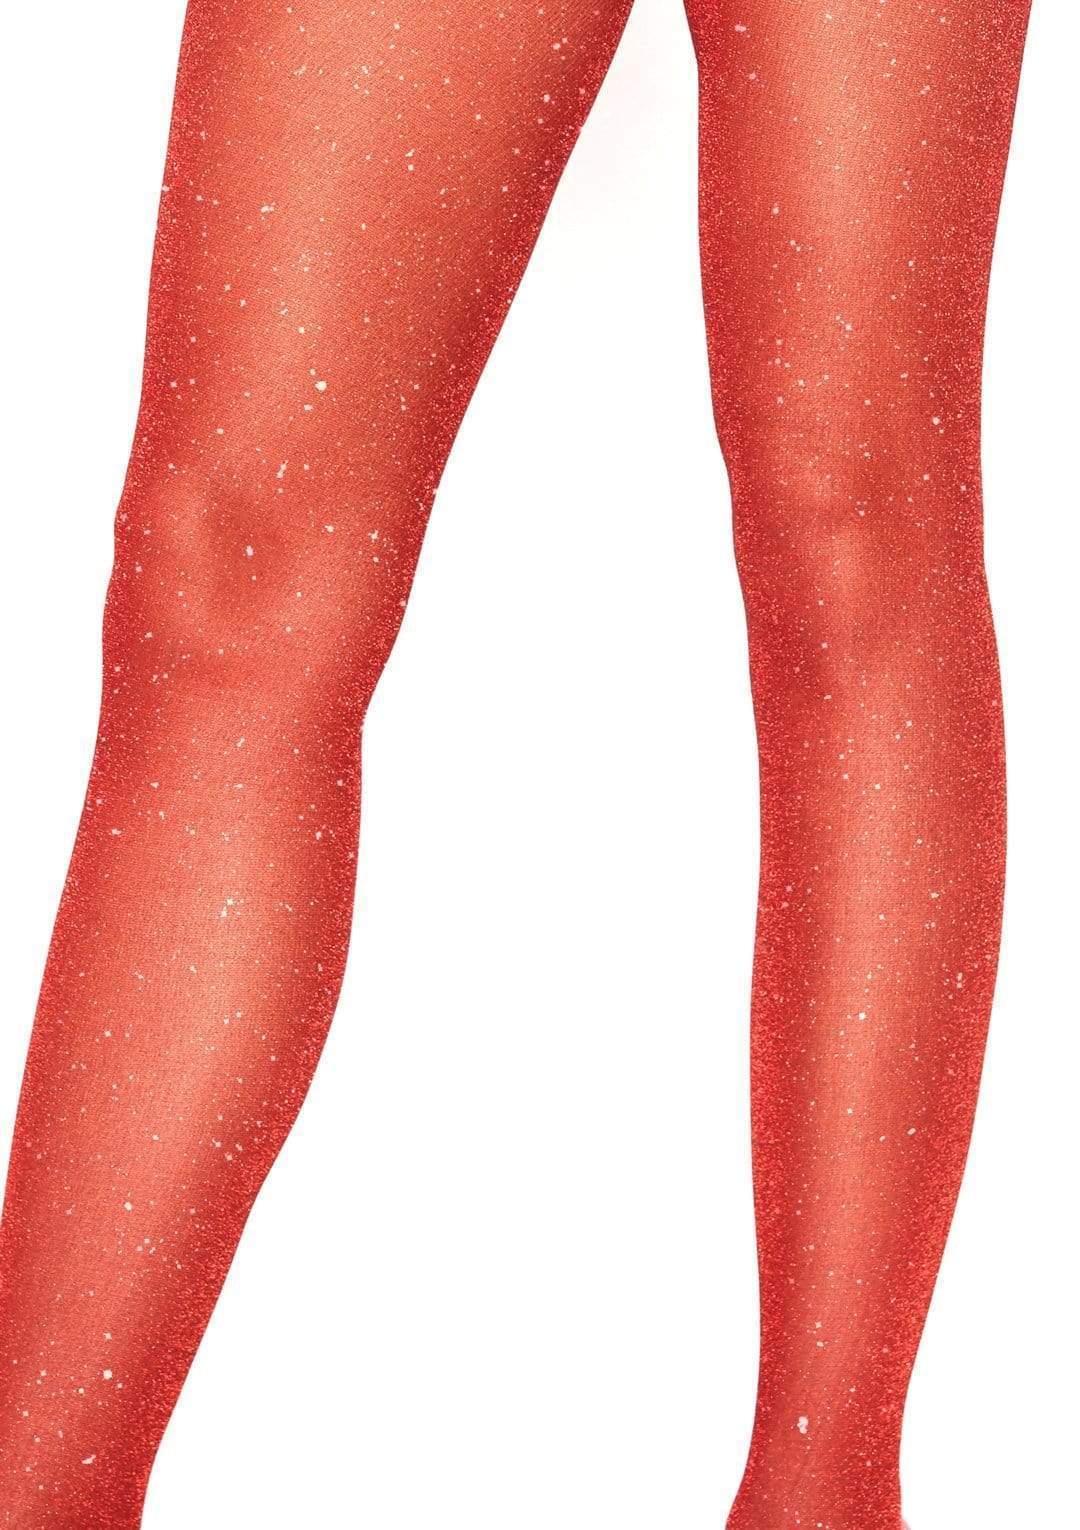 $20 American Apparel Gold Glitter Sheer Shimmer Sparkle Tights Spring  Summer Party Girl Vibes Style Hosiery Tumblr